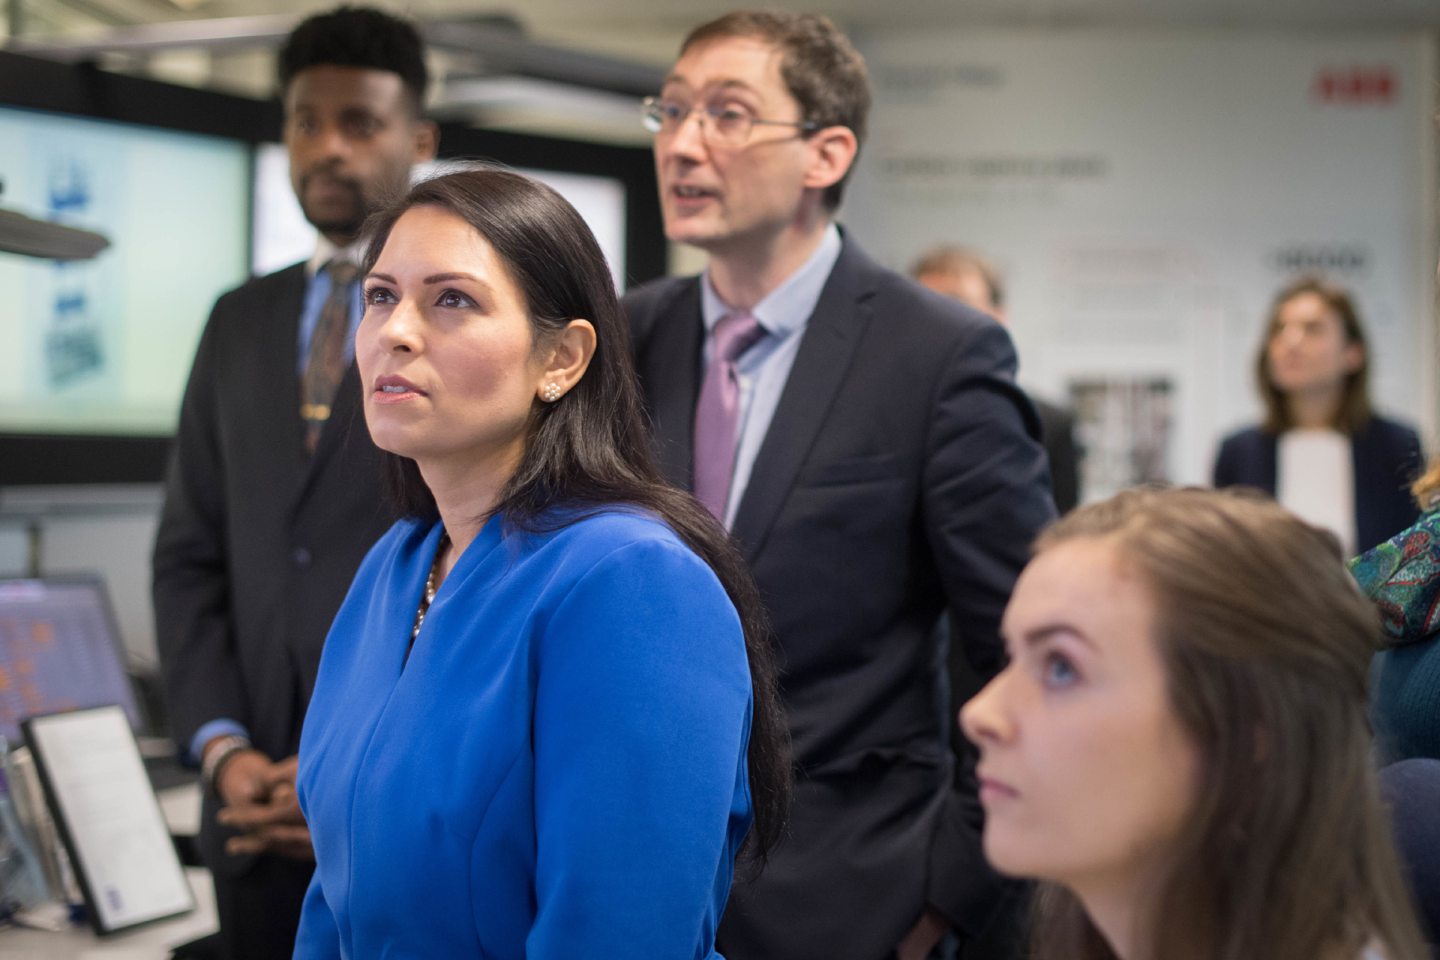 Home Secretary Priti Patel meets students and staff working on 'carbon capture' at Imperial College London in South Kensington, London where she announced plans for a new points-based immigration system.